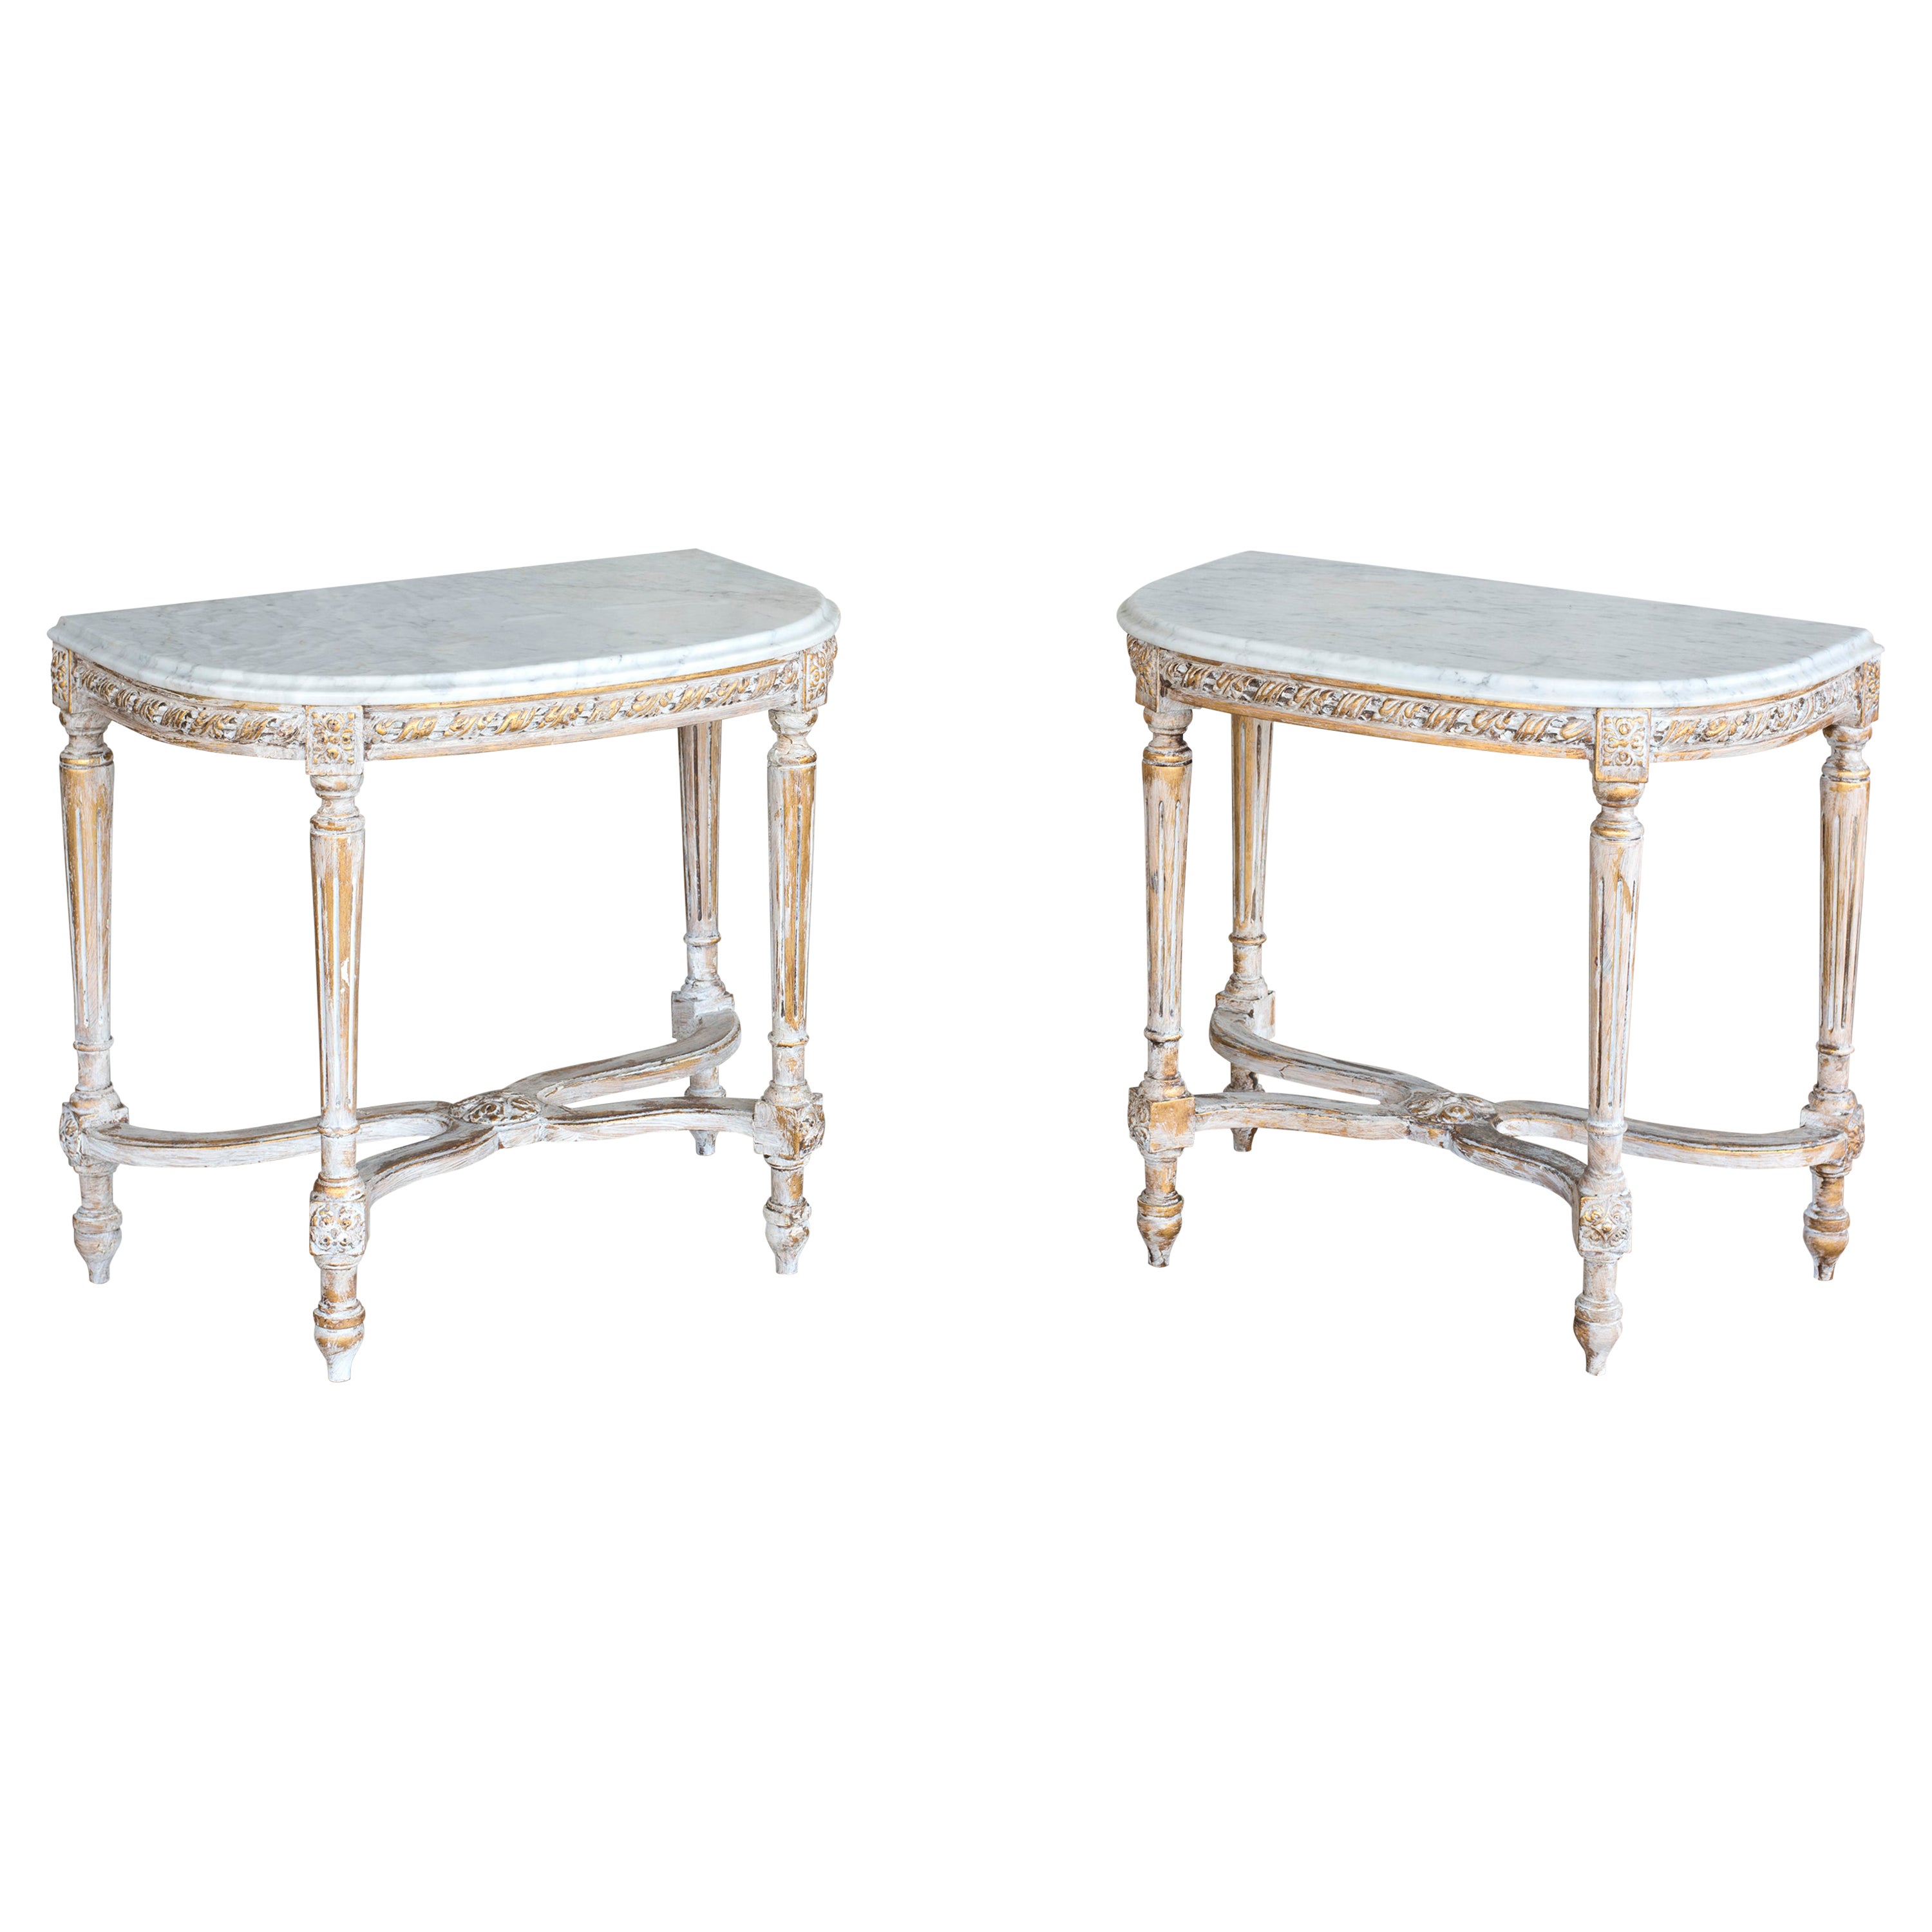 Shabby Effect Console Tables White Carrara Marble Top Louis XVI Style